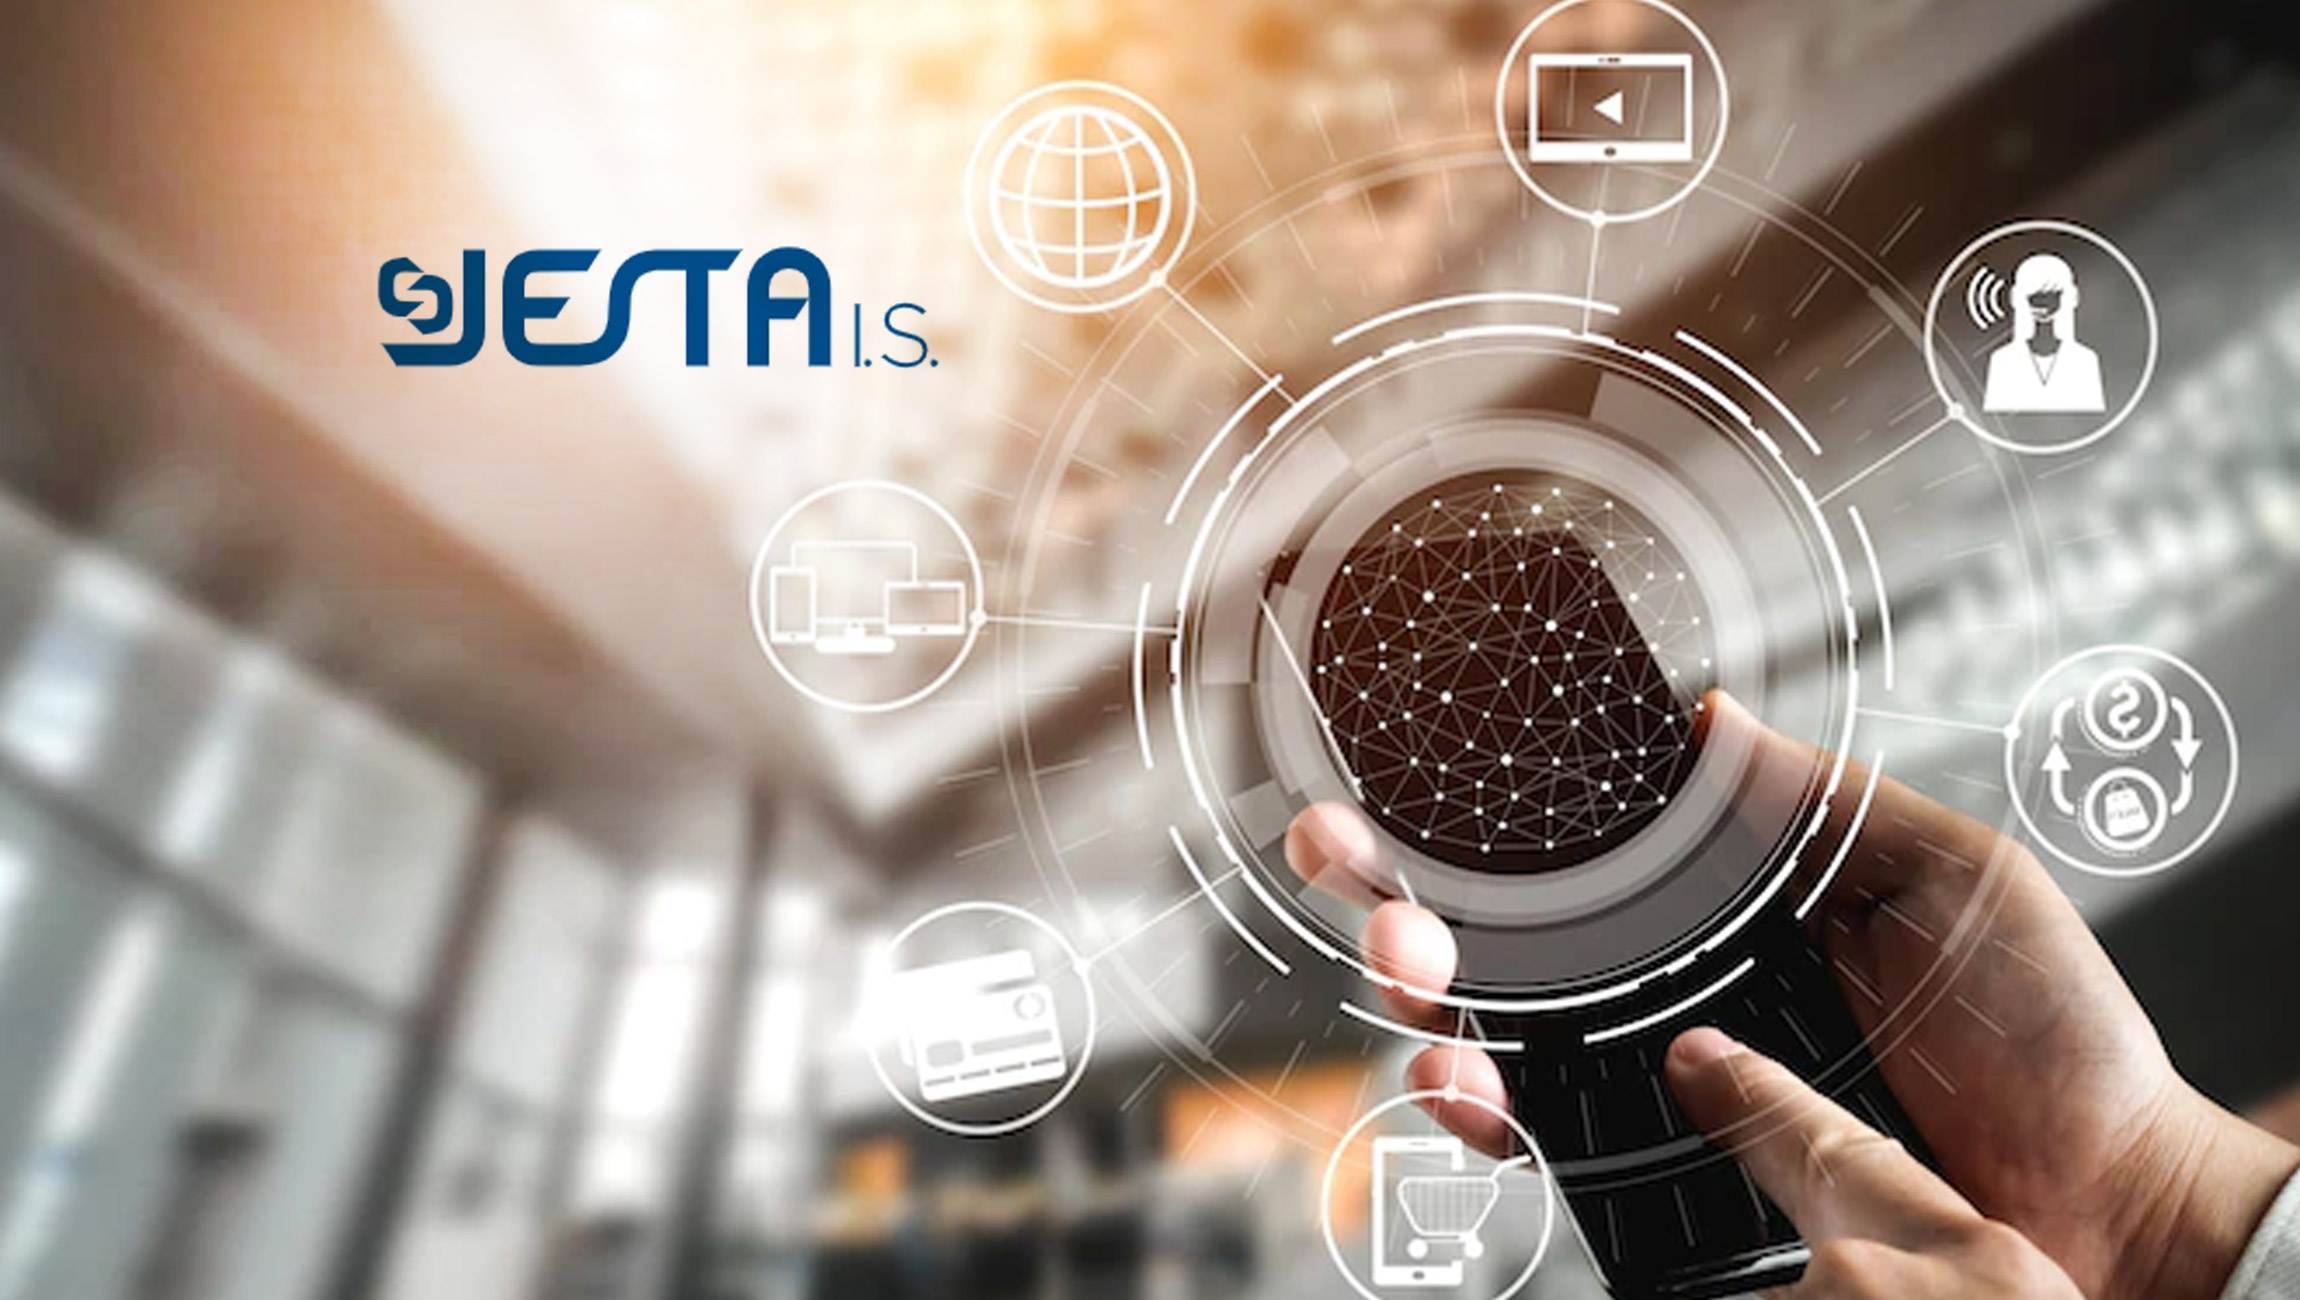 Jesta I.S.’s Omni + Solution Transforms Omnichannel Order Fulfillment and Customer Service with Real-Time Unified Commerce